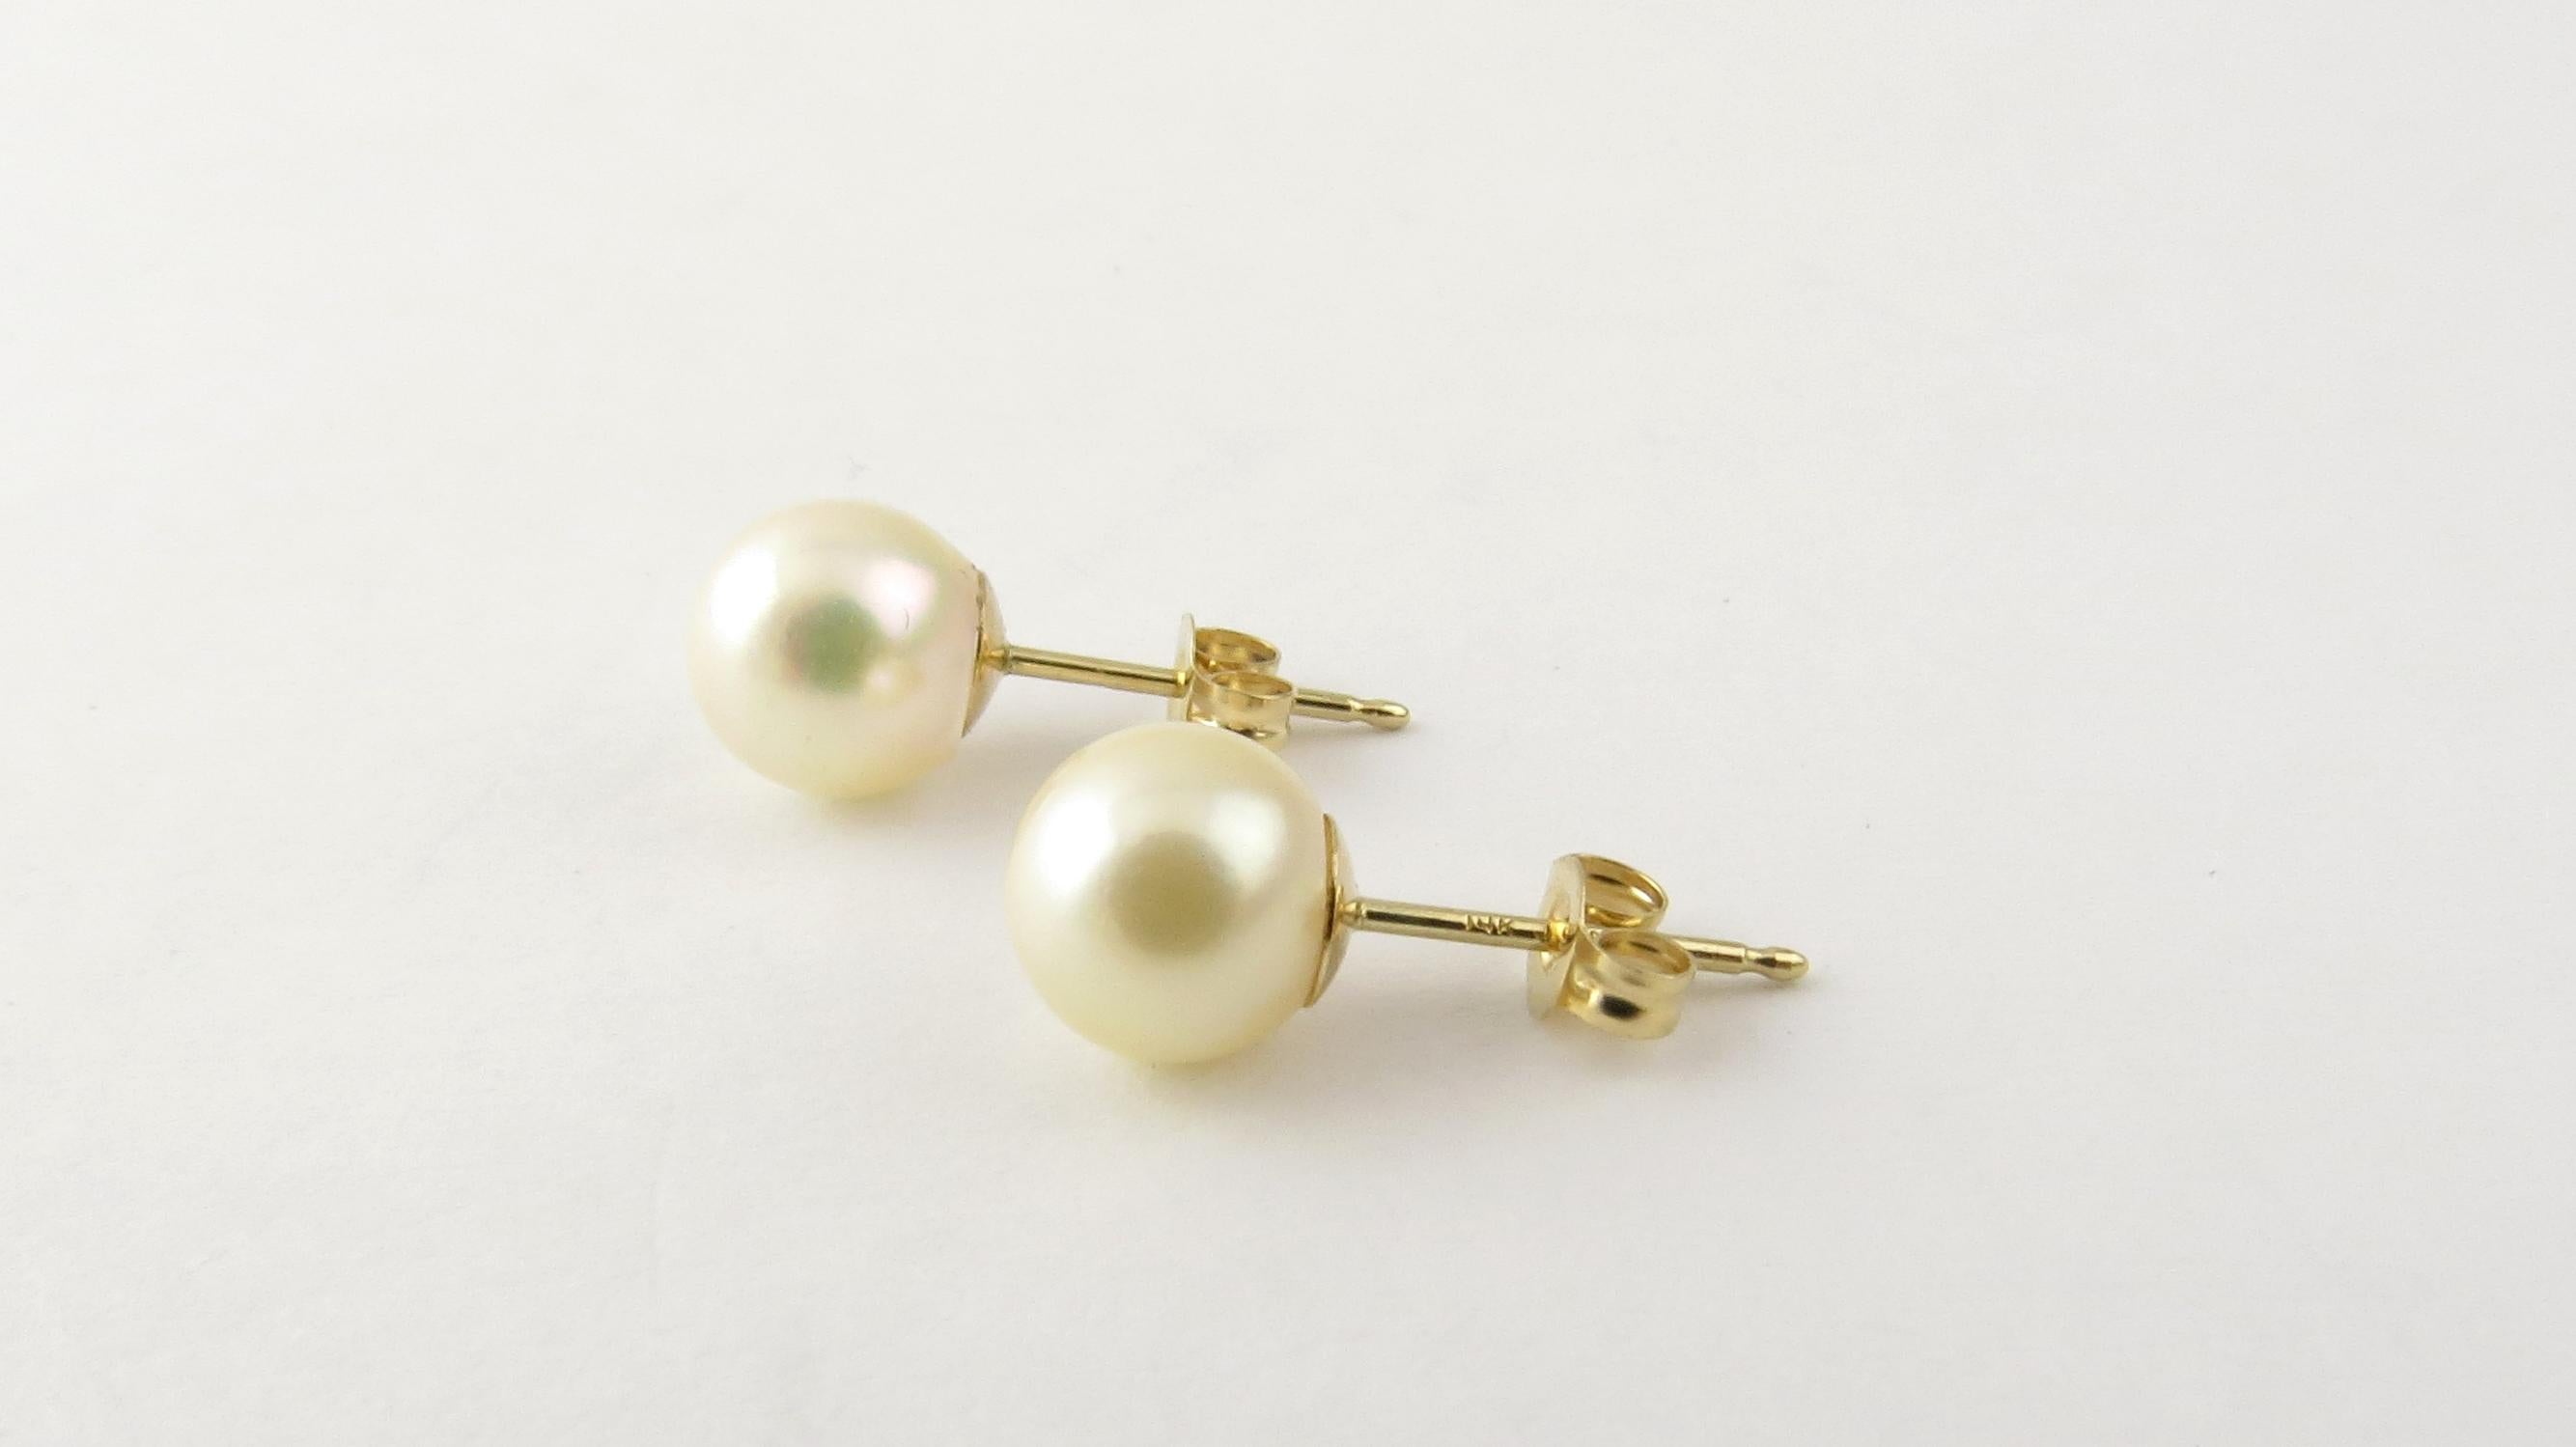 Vintage 14 Karat Yellow Gold Pearl Stud Earrings

These elegant stud earrings each features one 6 mm white pearl set in classic 14K yellow gold. Push back closures.

One pearl shows some imperfection as shown in last picture.

Size: 6 mm

Weight: